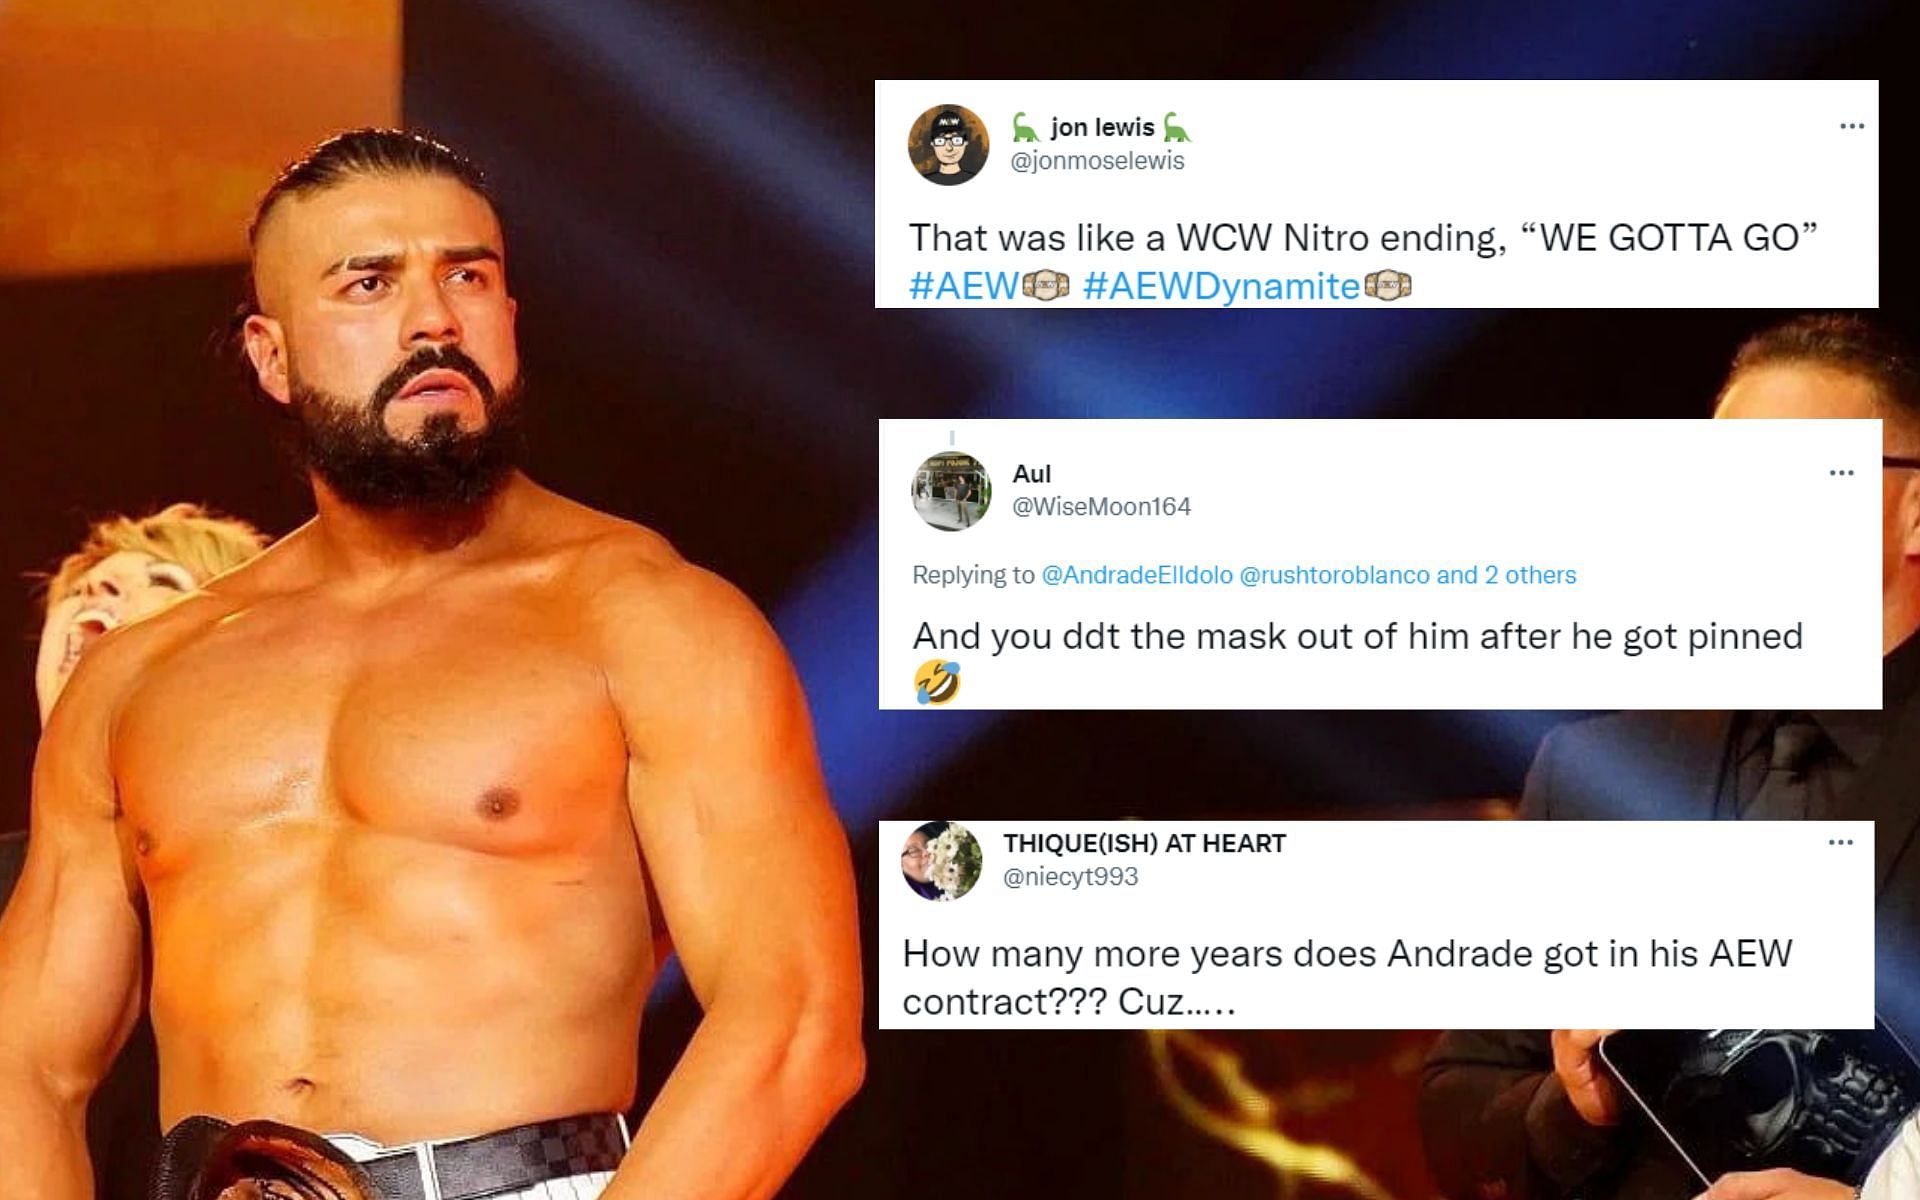 Andrade debuted on All Elite Wrestling in June 2021